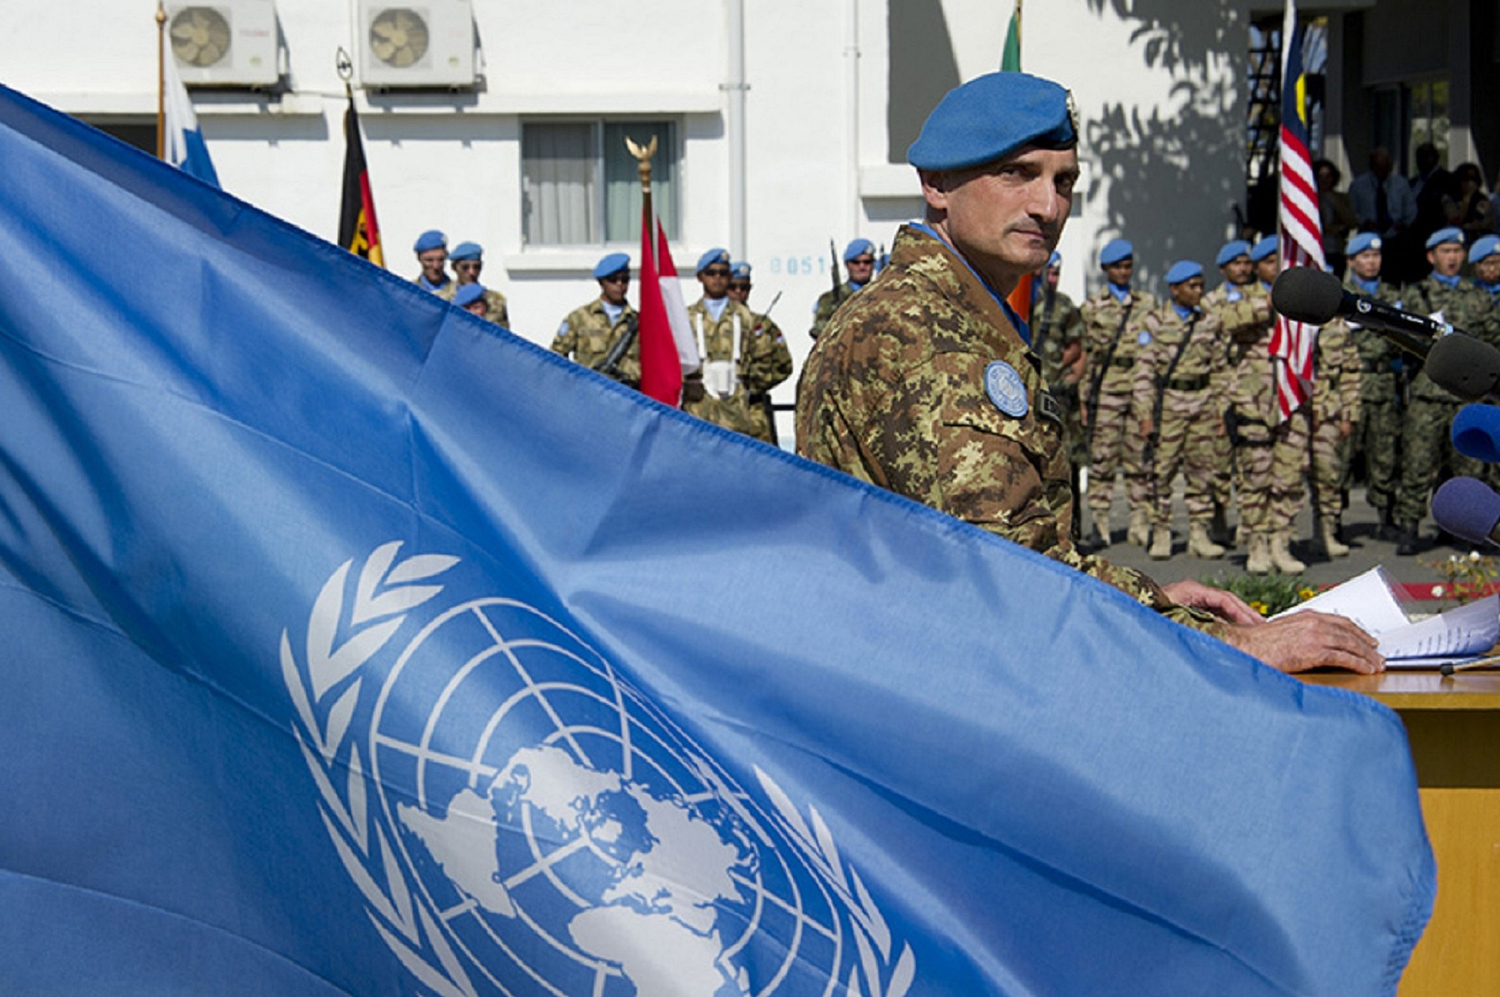 UNIFIL Head of Mission and Force Commander Major-General Luciano Portolano